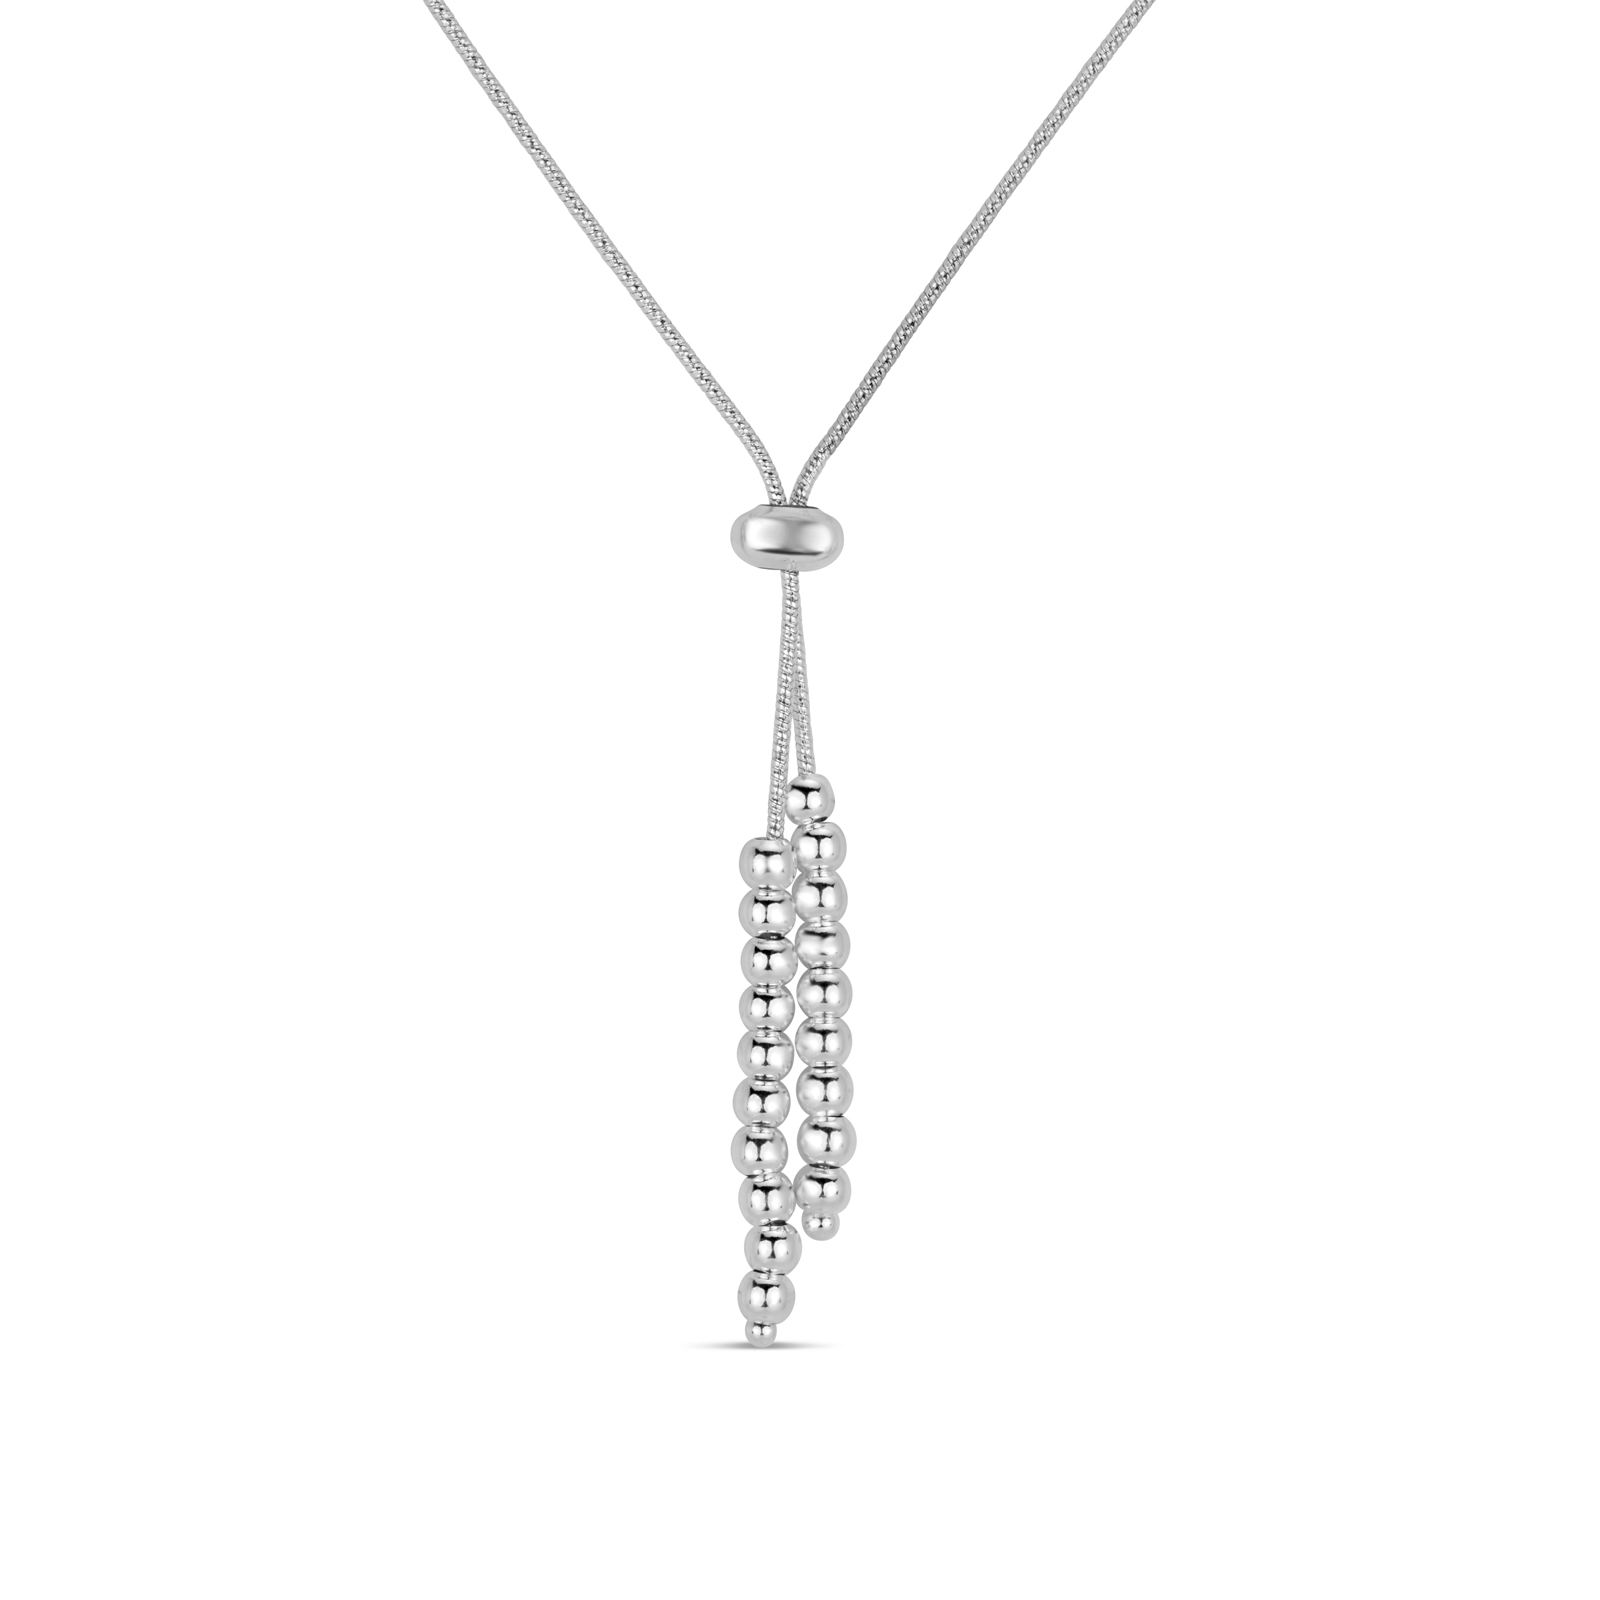 Sterling Silver Y-Necklace with Beaded Tassel, 20 Inch